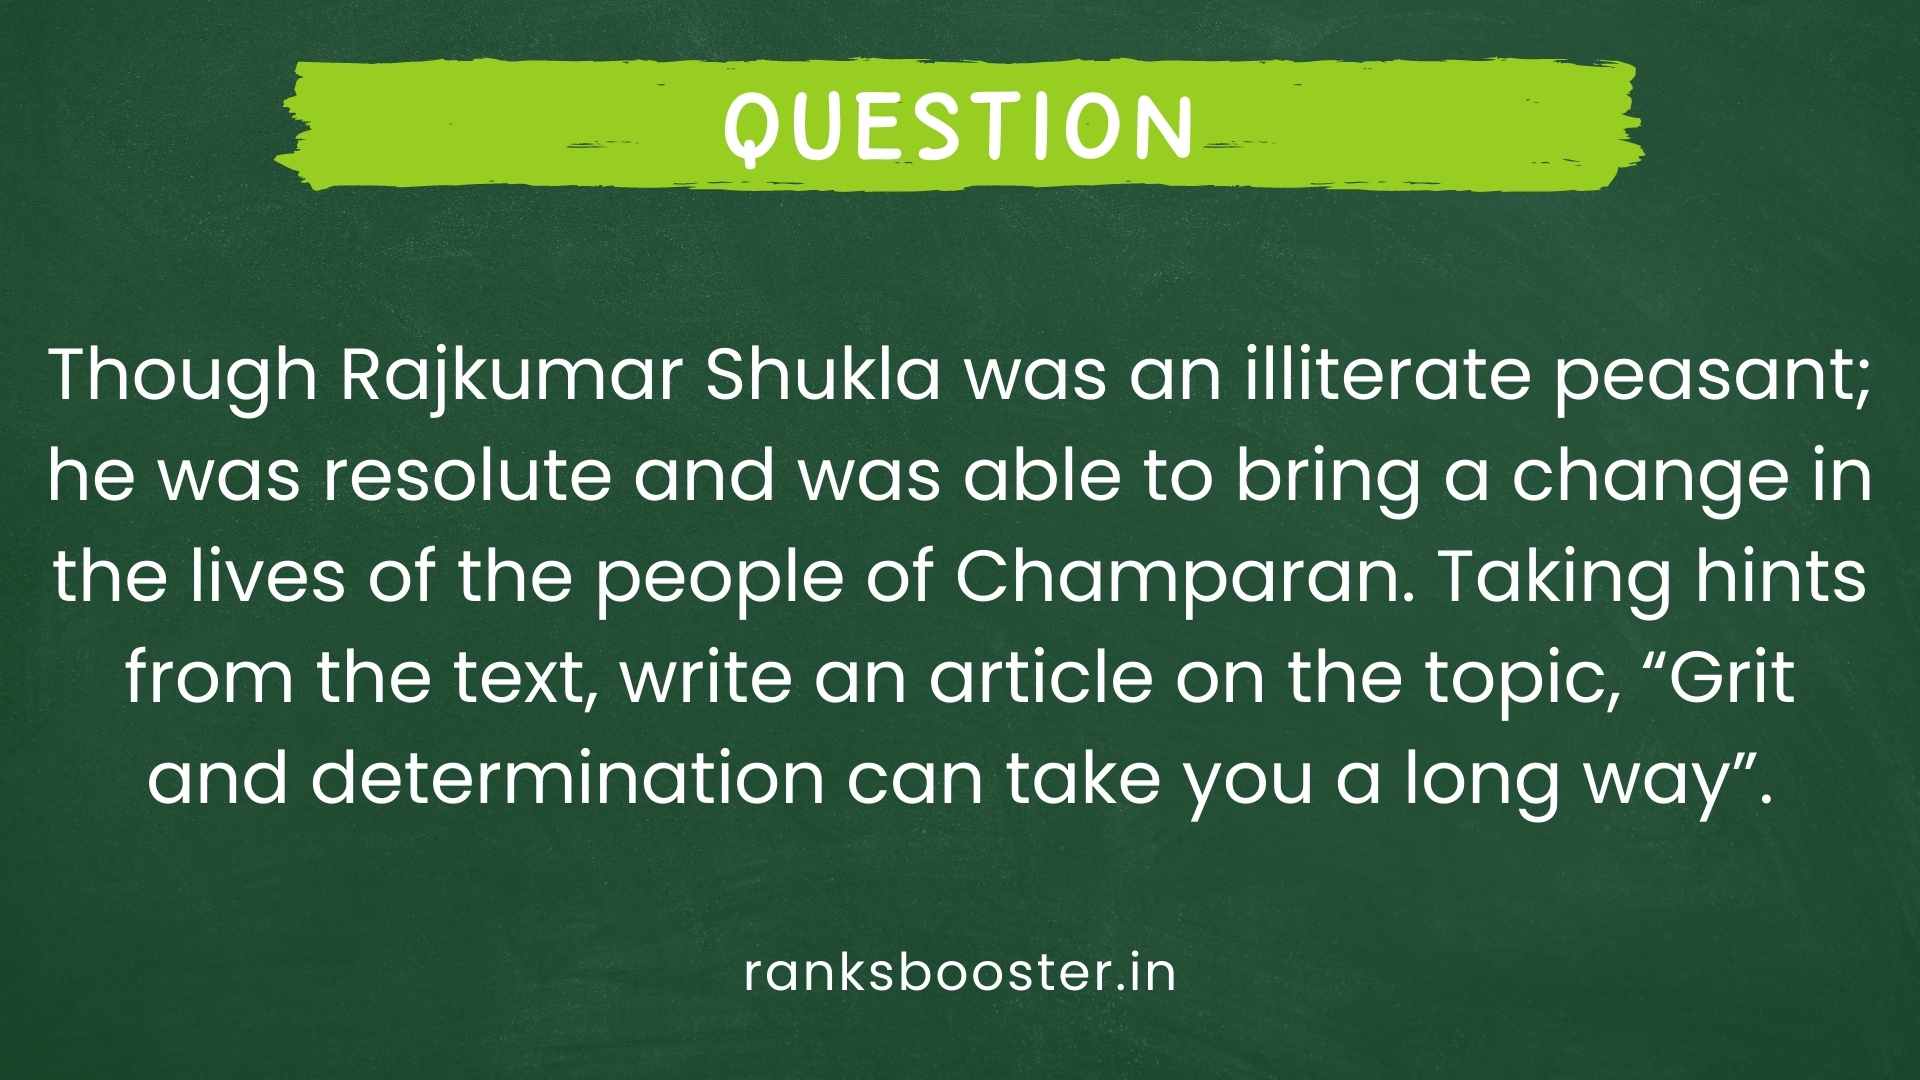 Question: Though Rajkumar Shukla was an illiterate peasant; he was resolute and was able to bring a change in the lives of the people of Champaran. Taking hints from the text, write an article on the topic, “Grit and determination can take you a long way”. [CBSE Sample Paper 2015]